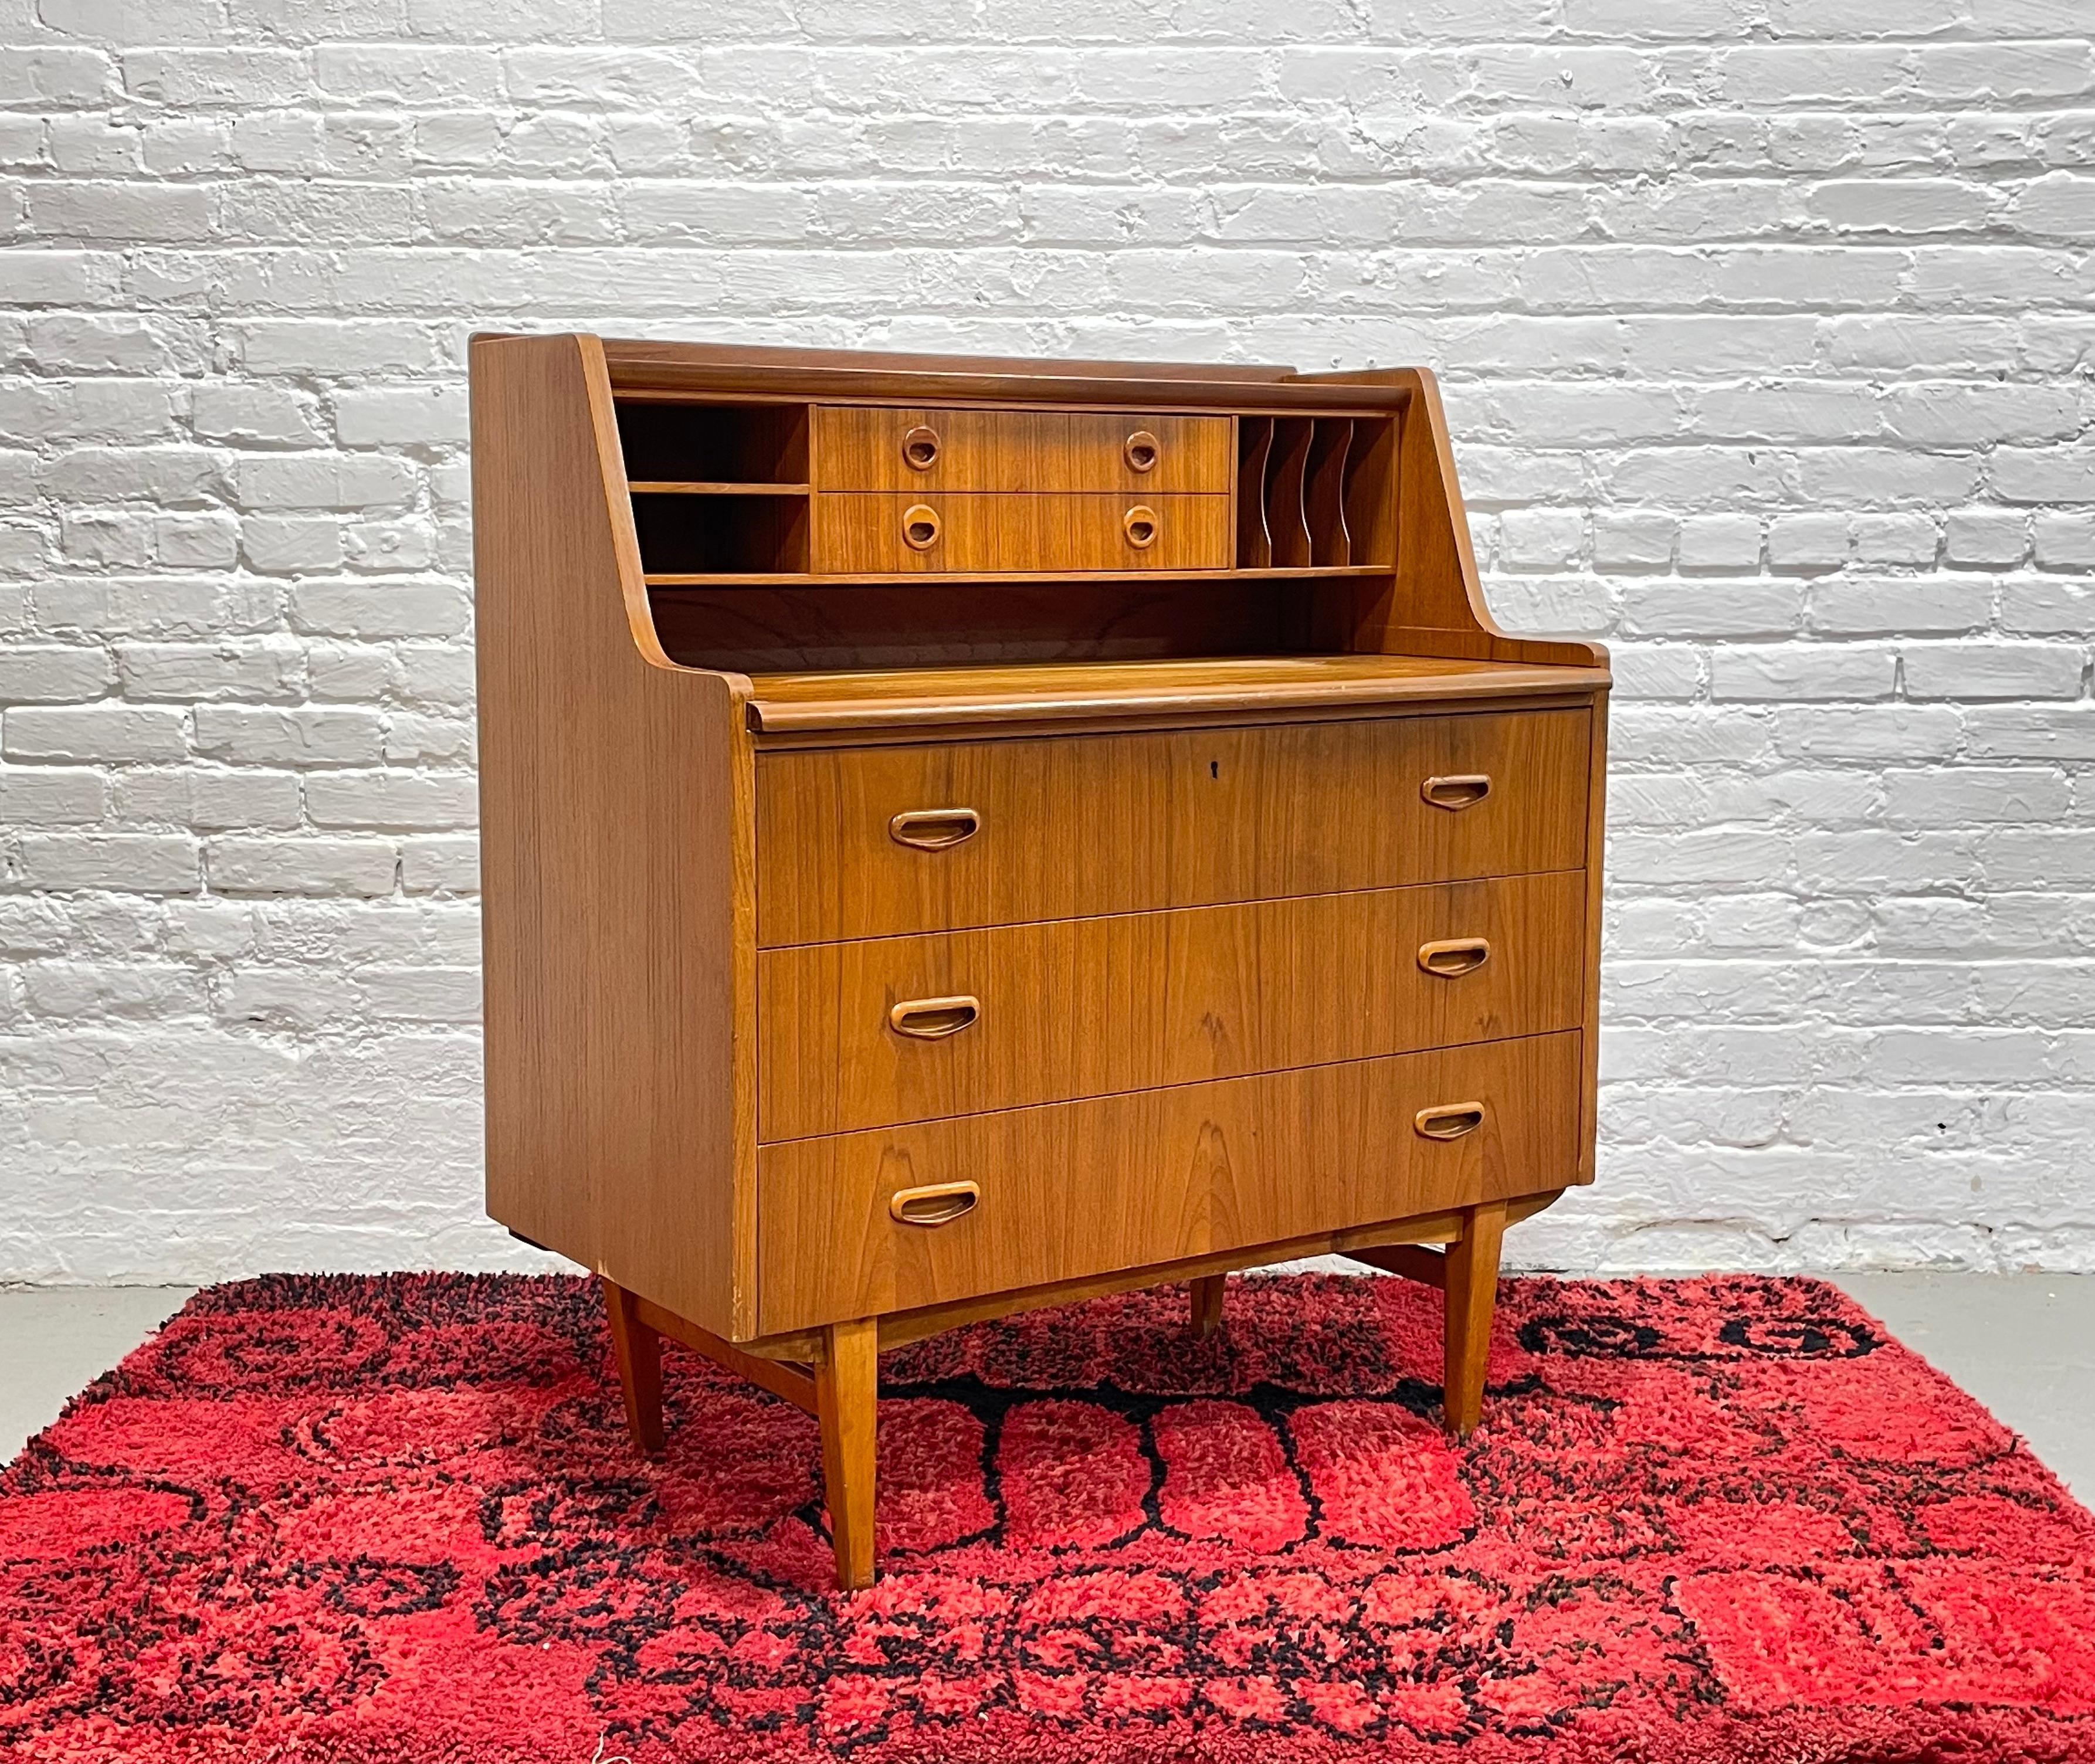 Vintage Mid century Modern Teak Secretary desk + dresser by Egon Ostergaard for SMI Svenk, Made in Sweden, c. 1960's. This piece boasts tons of delicious design details: three deep and spacious drawers below and a pull out desk, plus additional